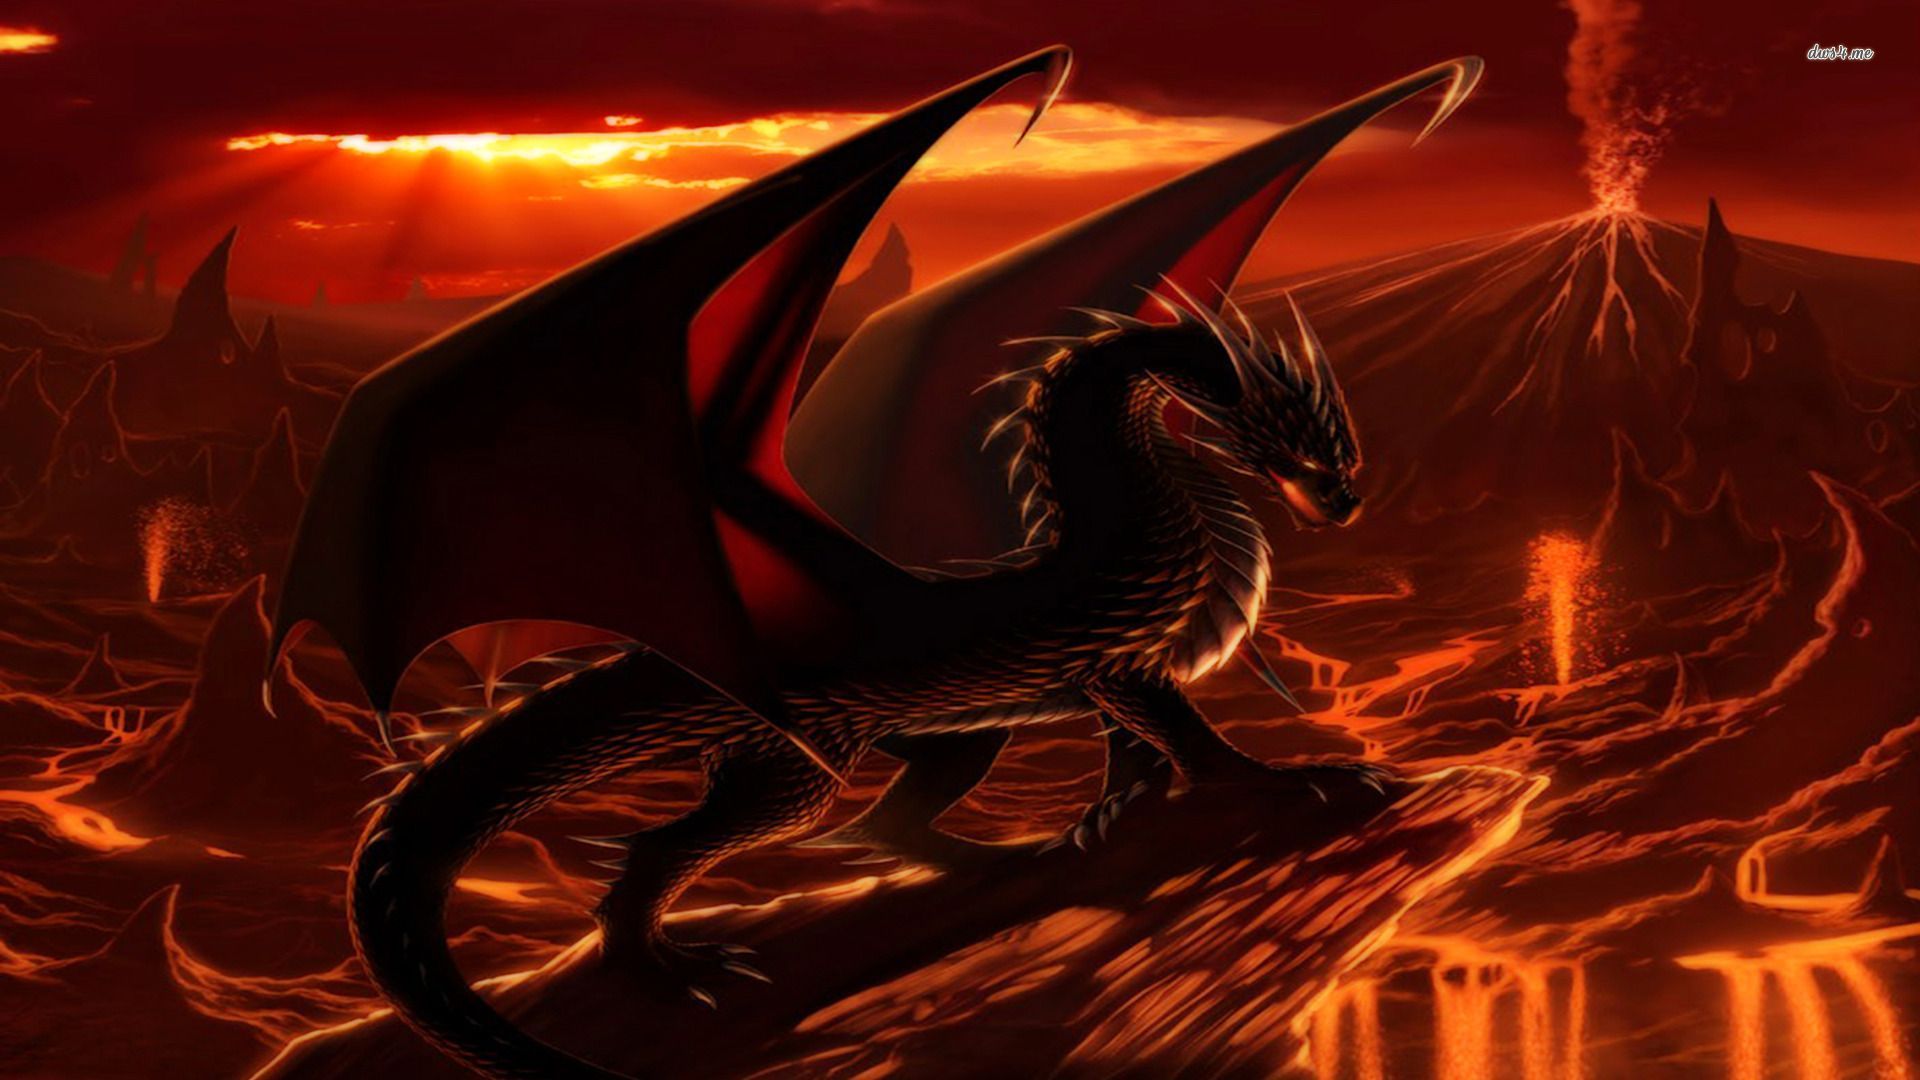 Dragon surrounded by lava HD wallpaper. Fire dragon, Dragon image, Cool dragons